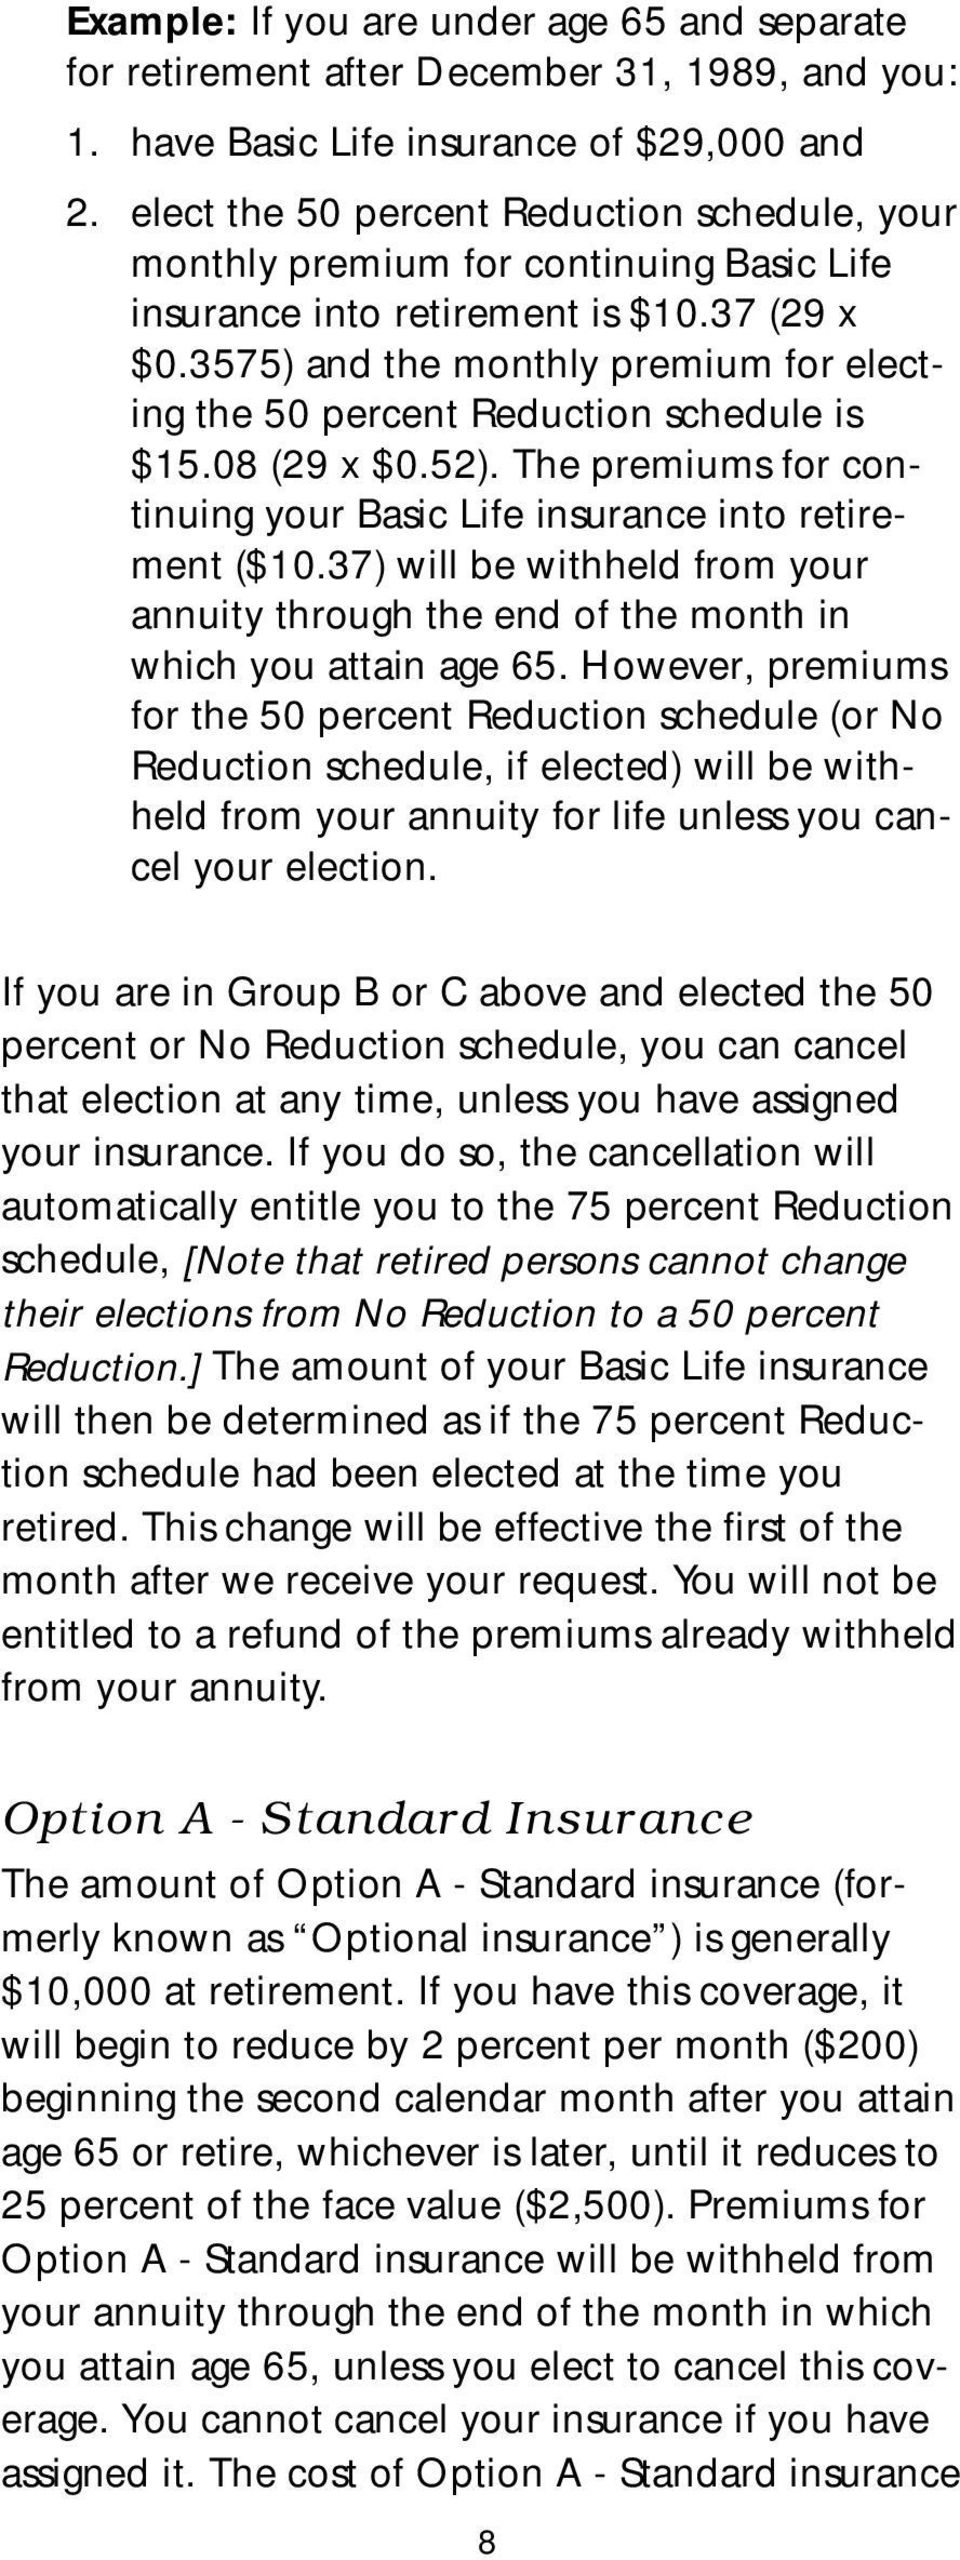 3575) and the monthly premium for electing the 50 percent Reduction schedule is $15.08 (29 x $0.52). The premiums for continuing your Basic Life insurance into retirement ($10.